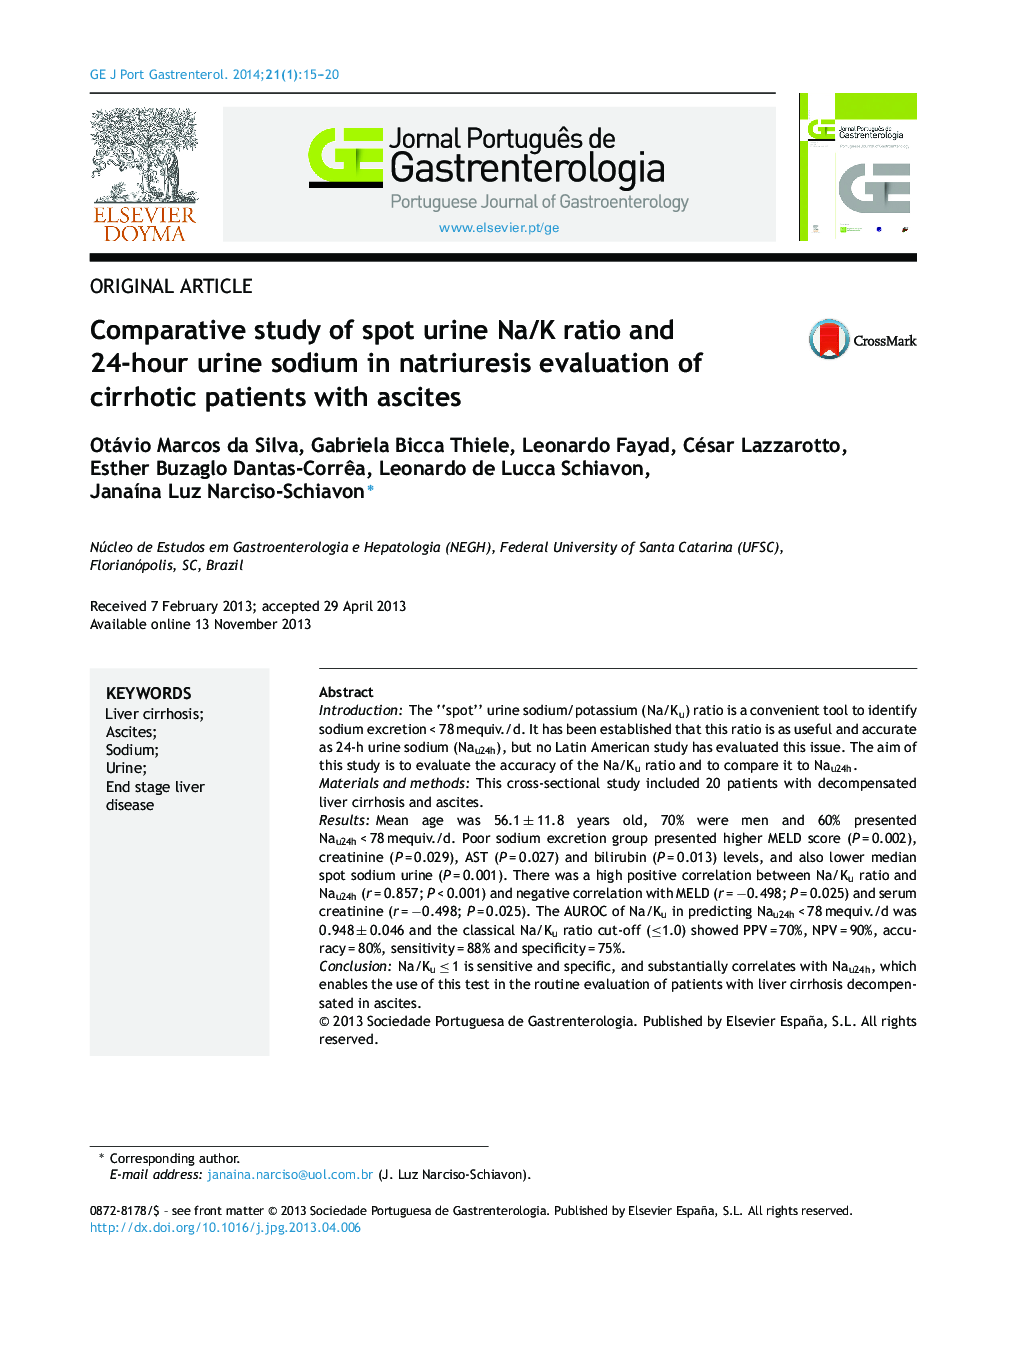 Comparative study of spot urine Na/K ratio and 24-hour urine sodium in natriuresis evaluation of cirrhotic patients with ascites